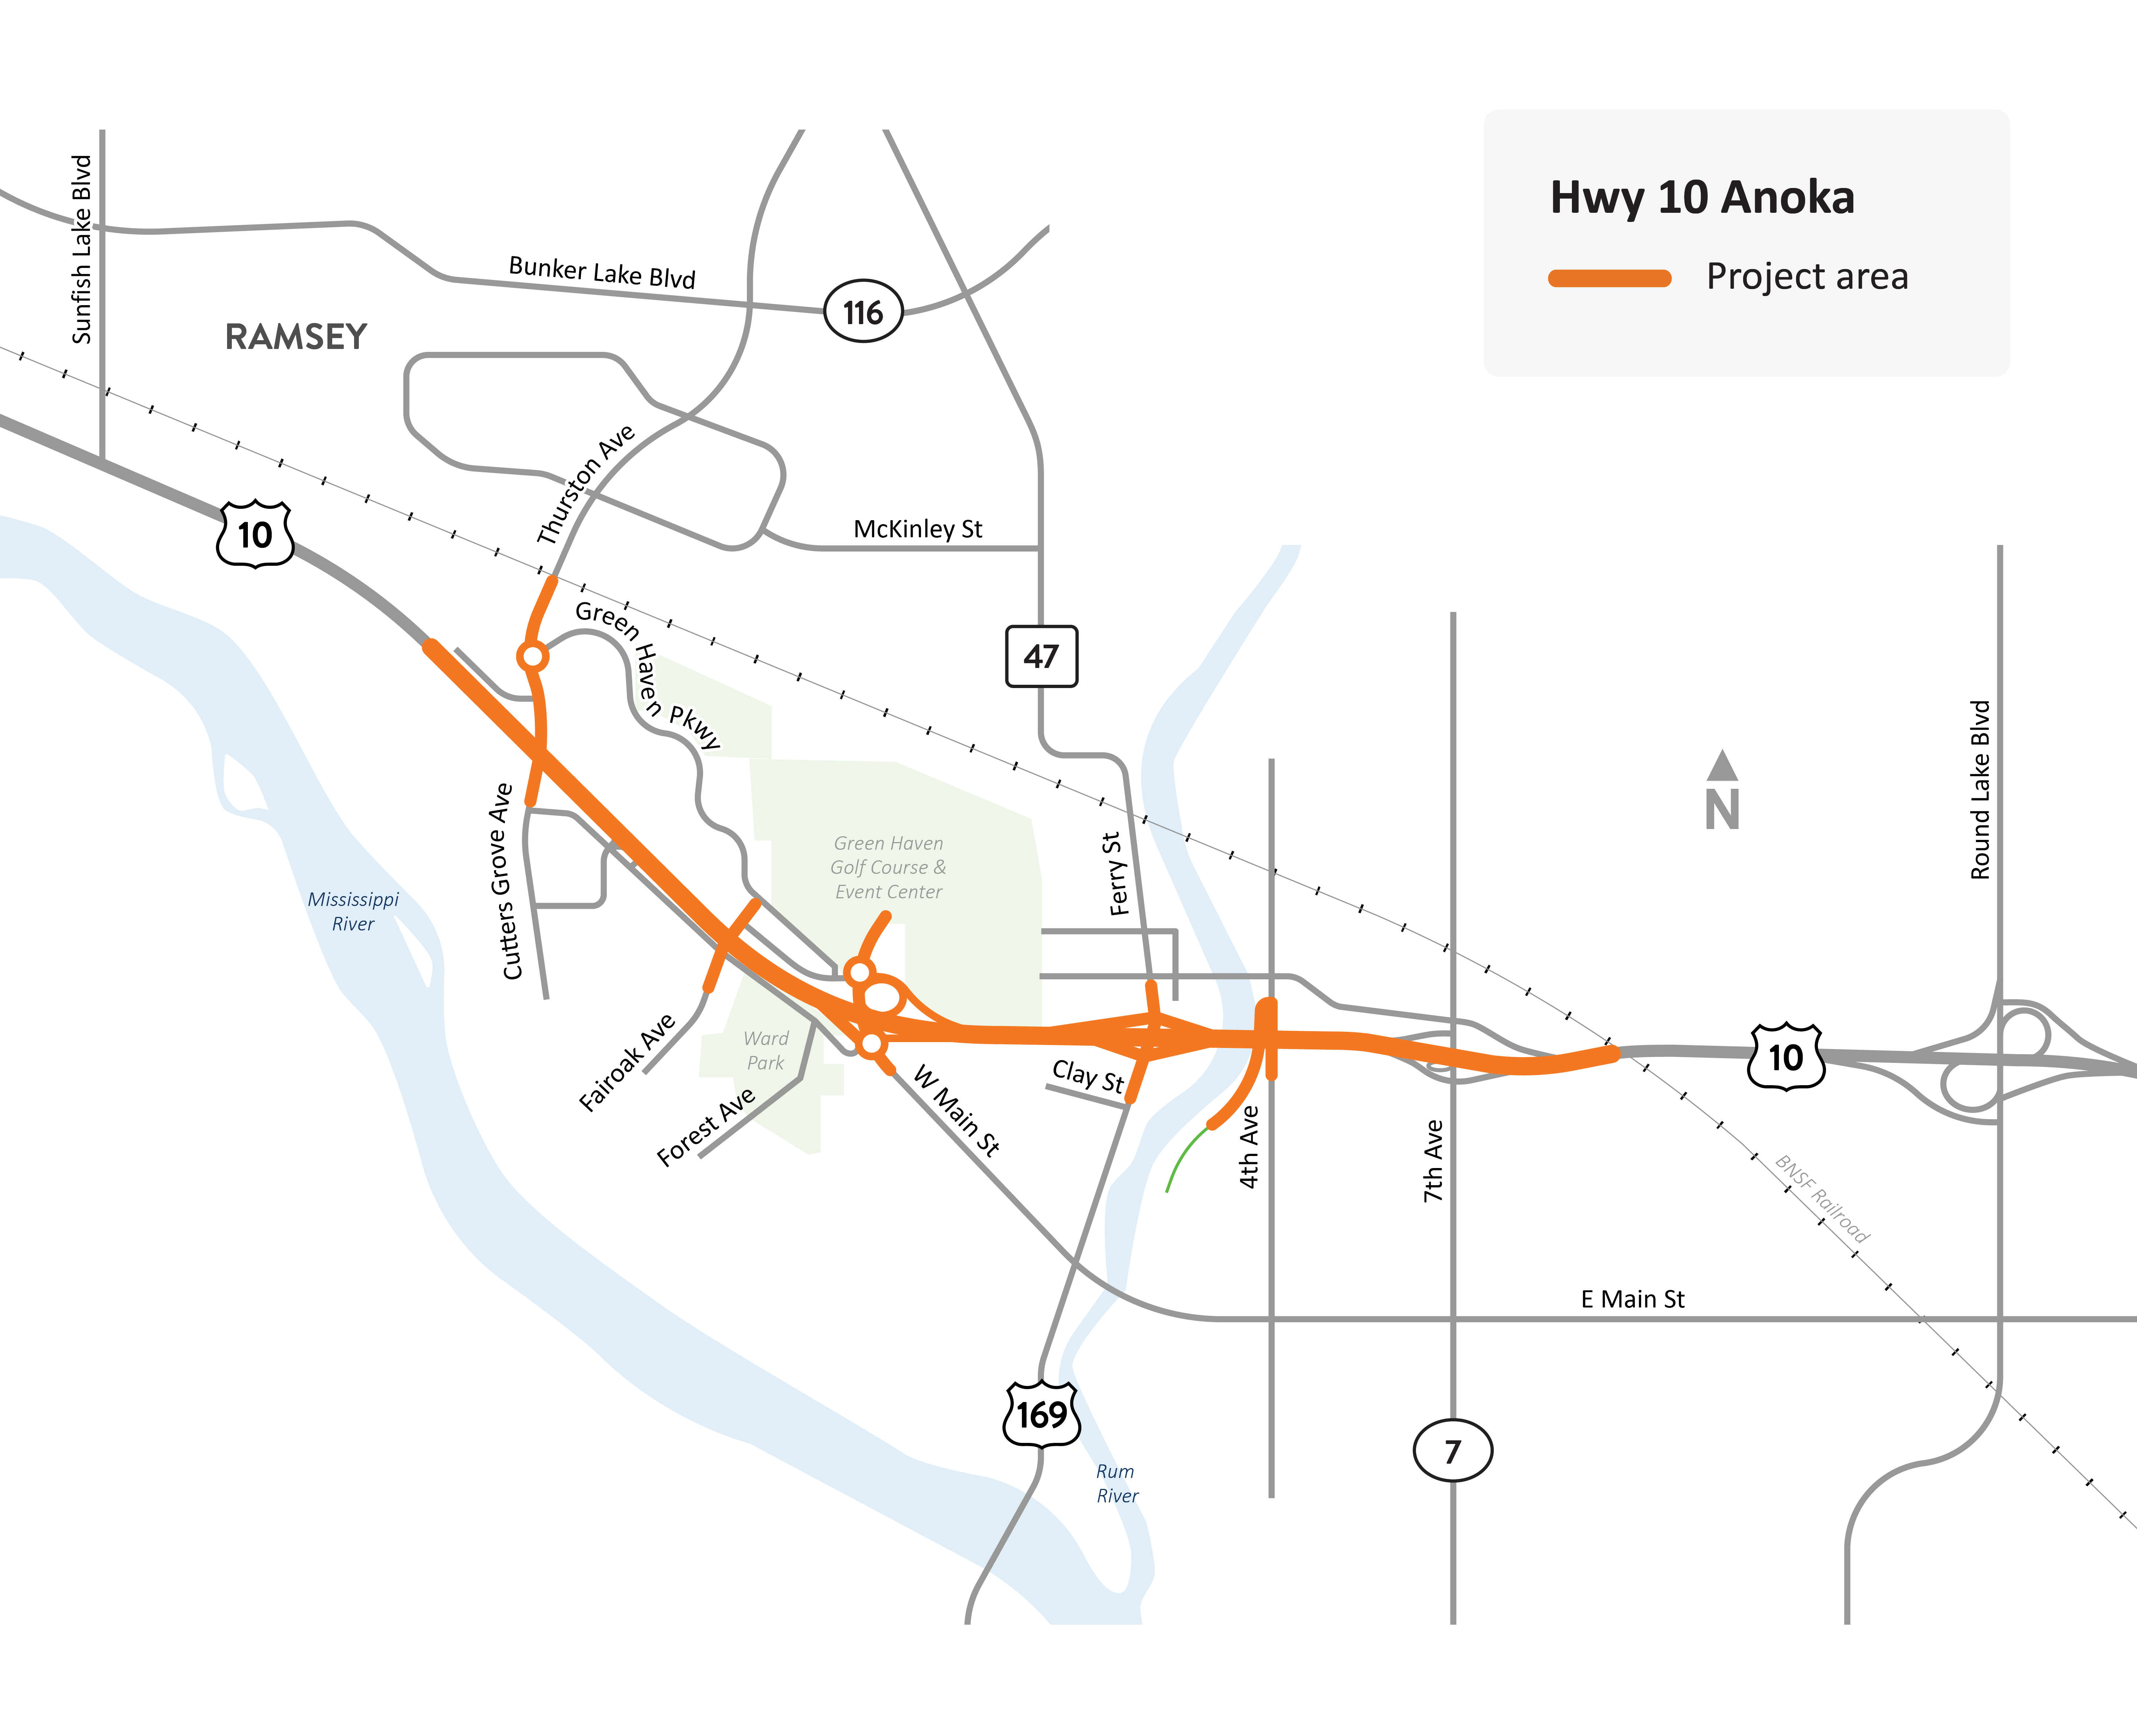 Hwy 10 in Anoka project location map